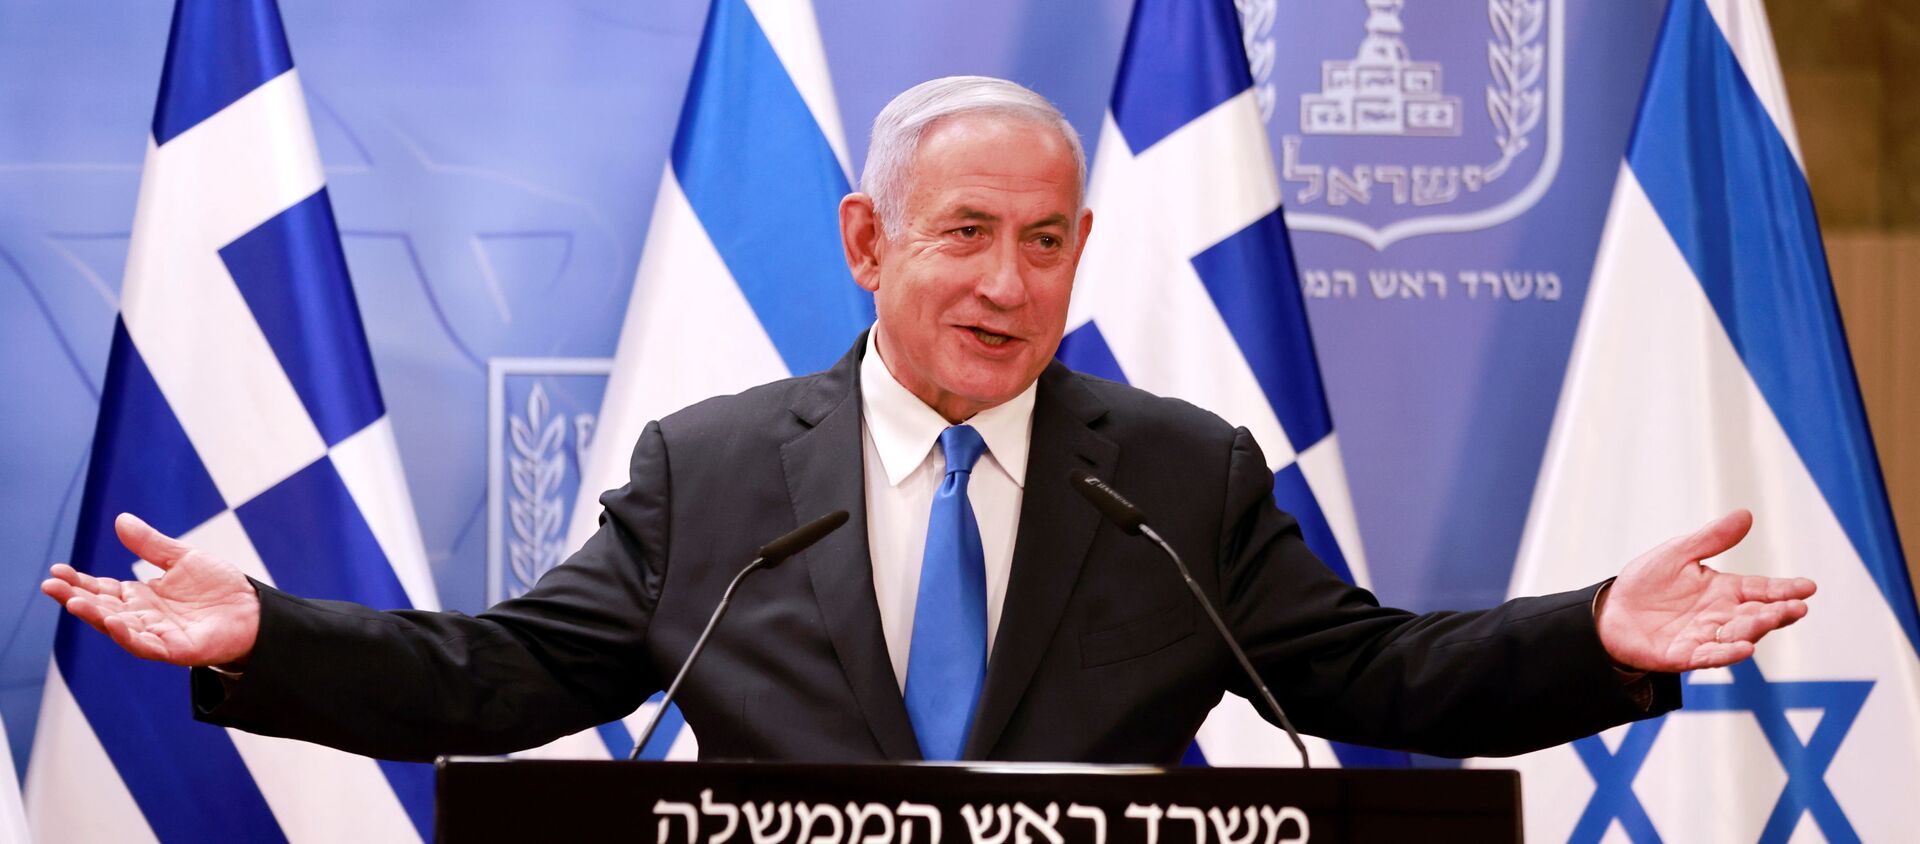 Israeli Prime Minister Benjamin Netanyahu speaks at a news conference next to Greek Prime Minister Kyriakos Mitsotakis (not pictured) after their meeting in the PM's office in Jerusalem February 8, 2021 - Sputnik International, 1920, 22.02.2021